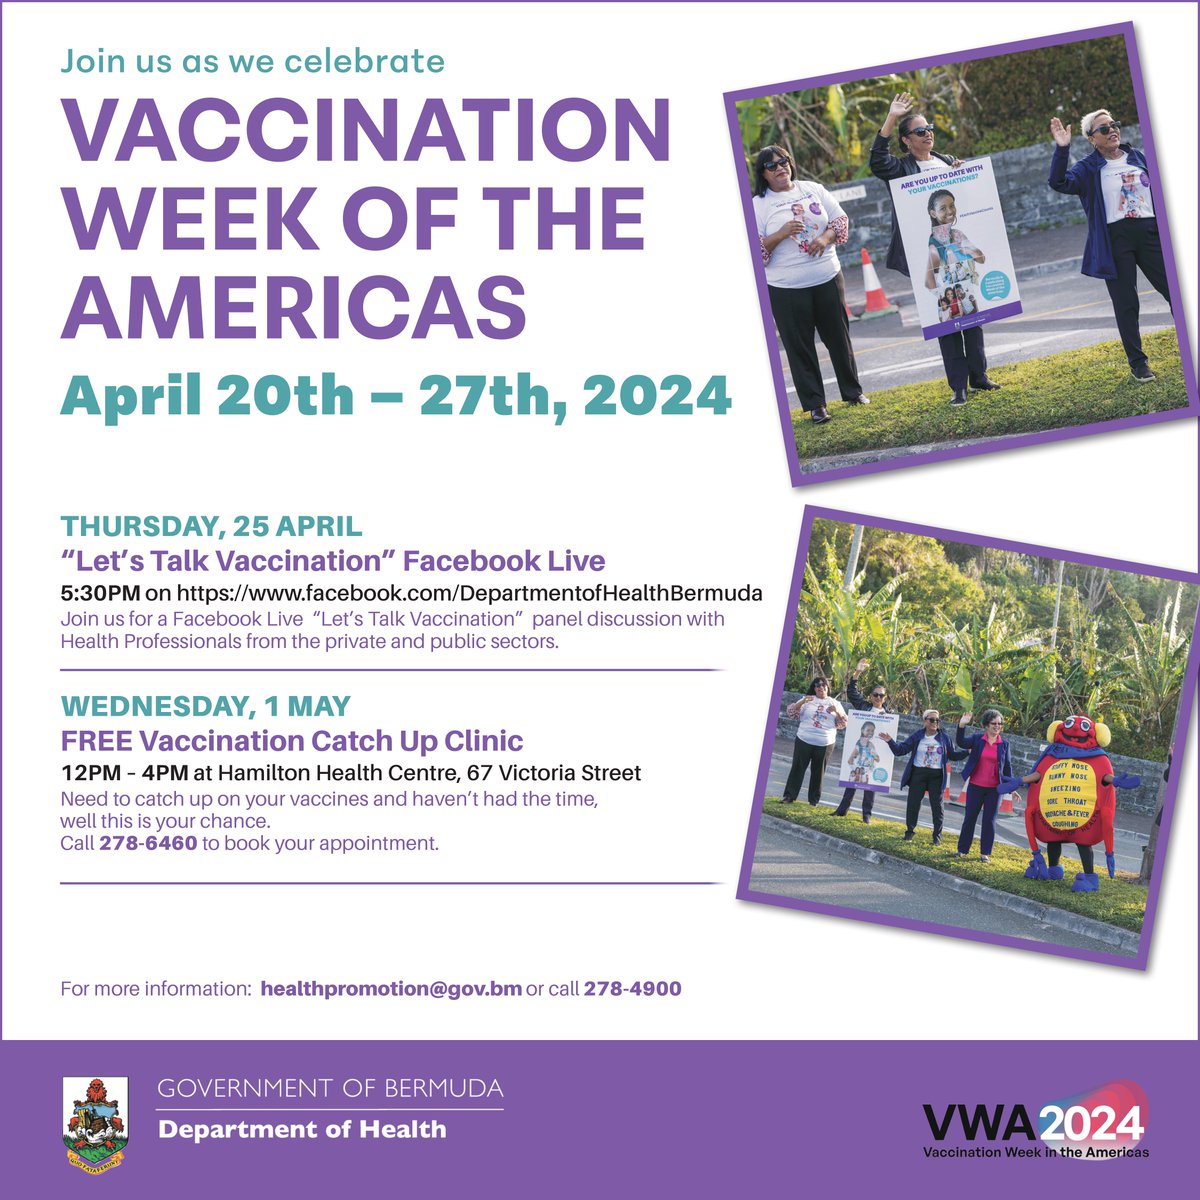 On Thursday, April 25th, the Department of Health will host a live panel discussion titled 'Let's Talk Vaccination' on Facebook Live. Health professionals from private and public sectors will share insights starting at 5:30 pm. Tune in at facebook.com/DepartmentofHe….